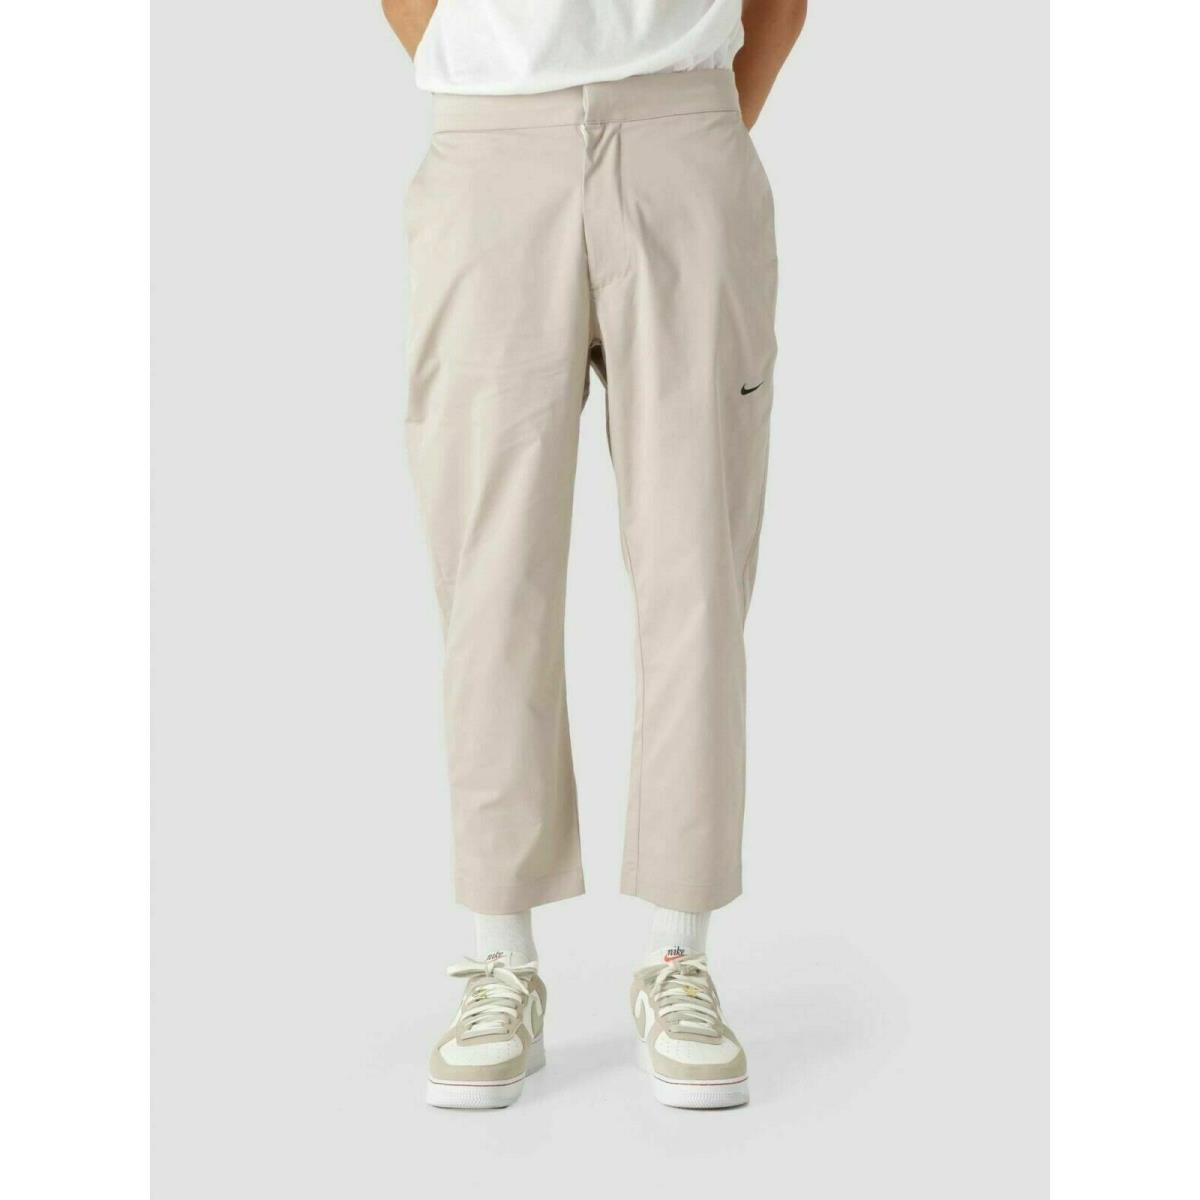 Nike Unlined Cropped Pants Pant Trousers Chino Taper Leg DD7032-236 Men`s 32